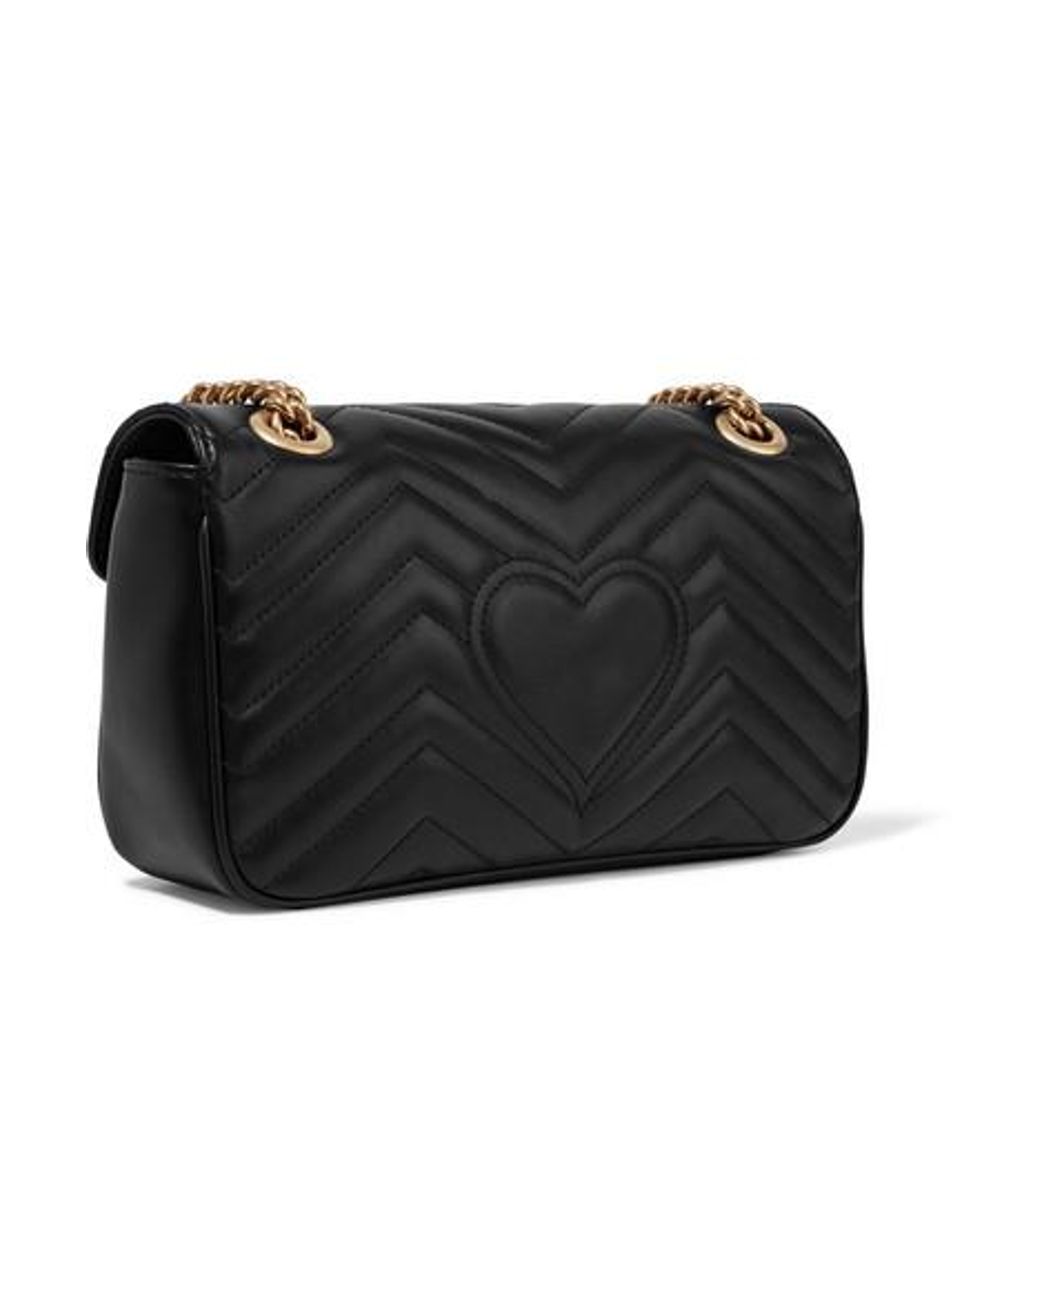 Gucci Shoulder Bag Gg Marmont Small Size In Matelassè Leather Worked With  Chevron Pattern And Heart On The Back in Black | Lyst UK